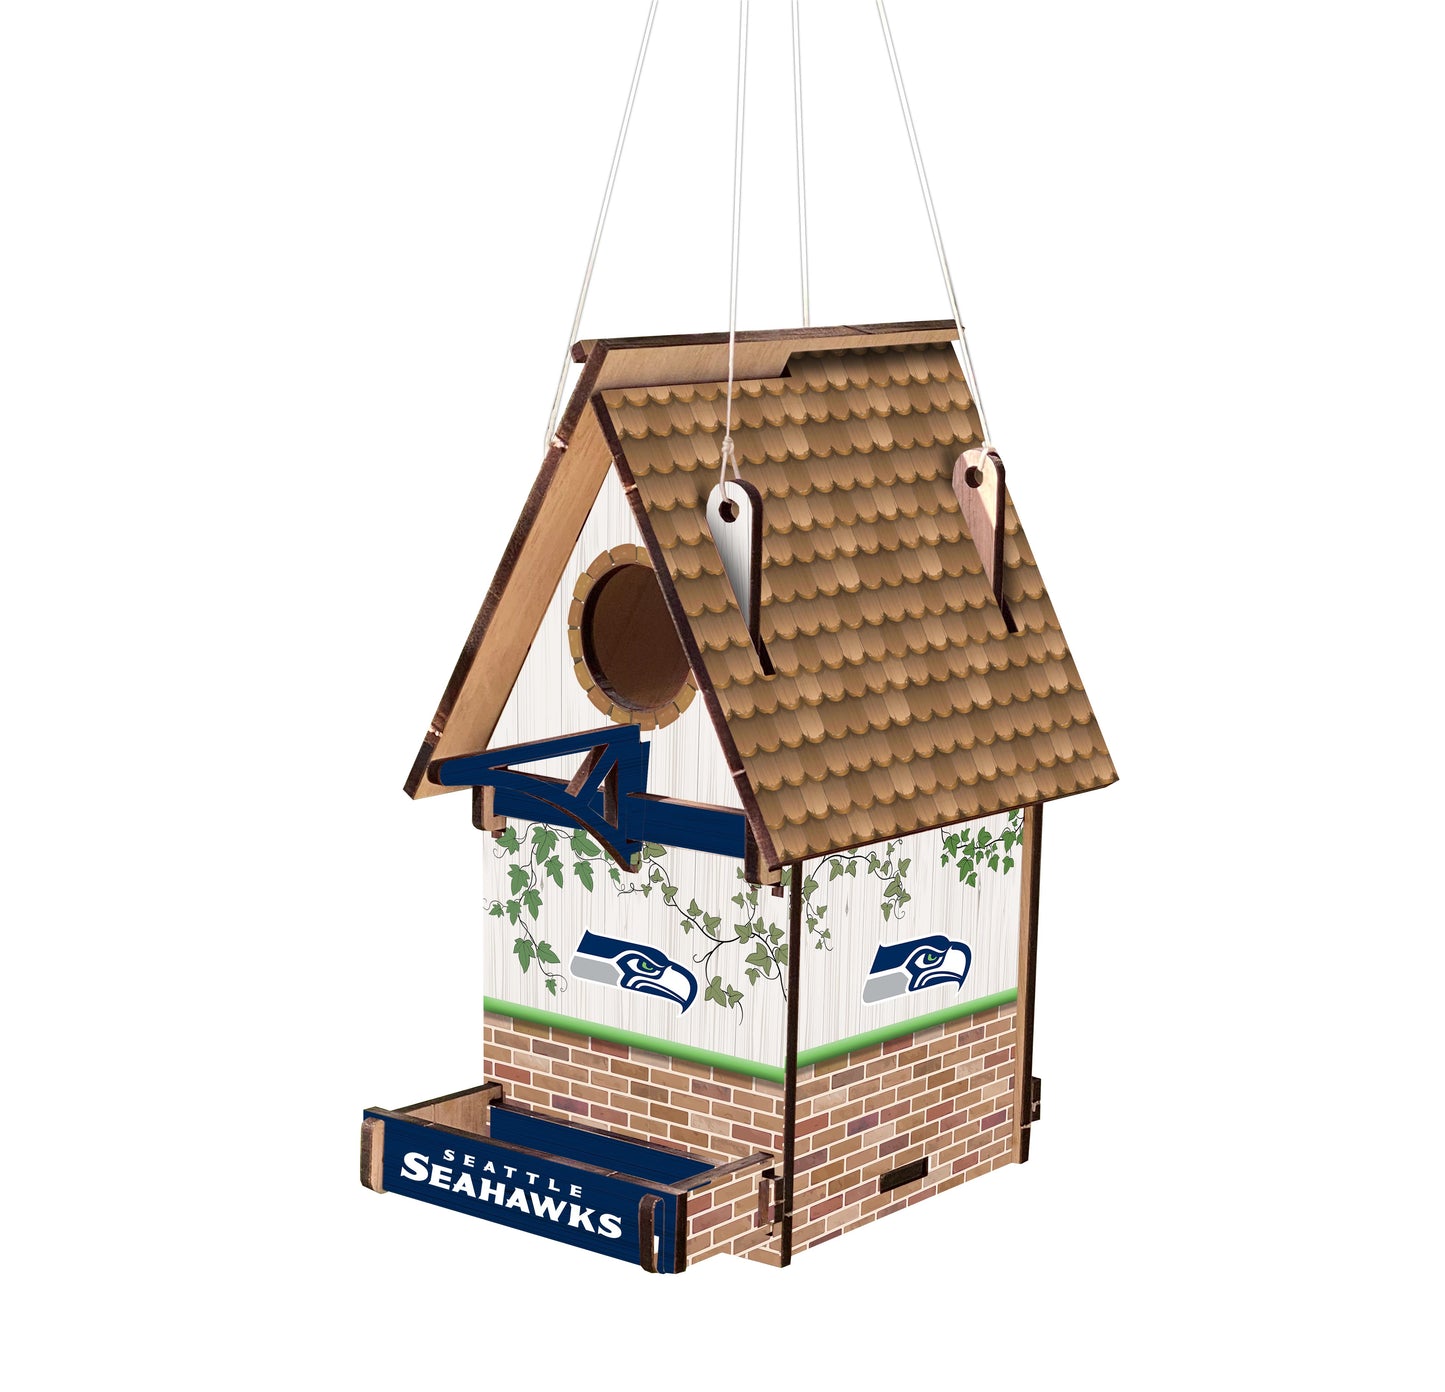 Made in USA Seattle Seahawks NFL Wood Birdhouse: 15"x15", team graphics/colors, durable wood, perfect for trees/posts. Officially licensed by Fan Creations.